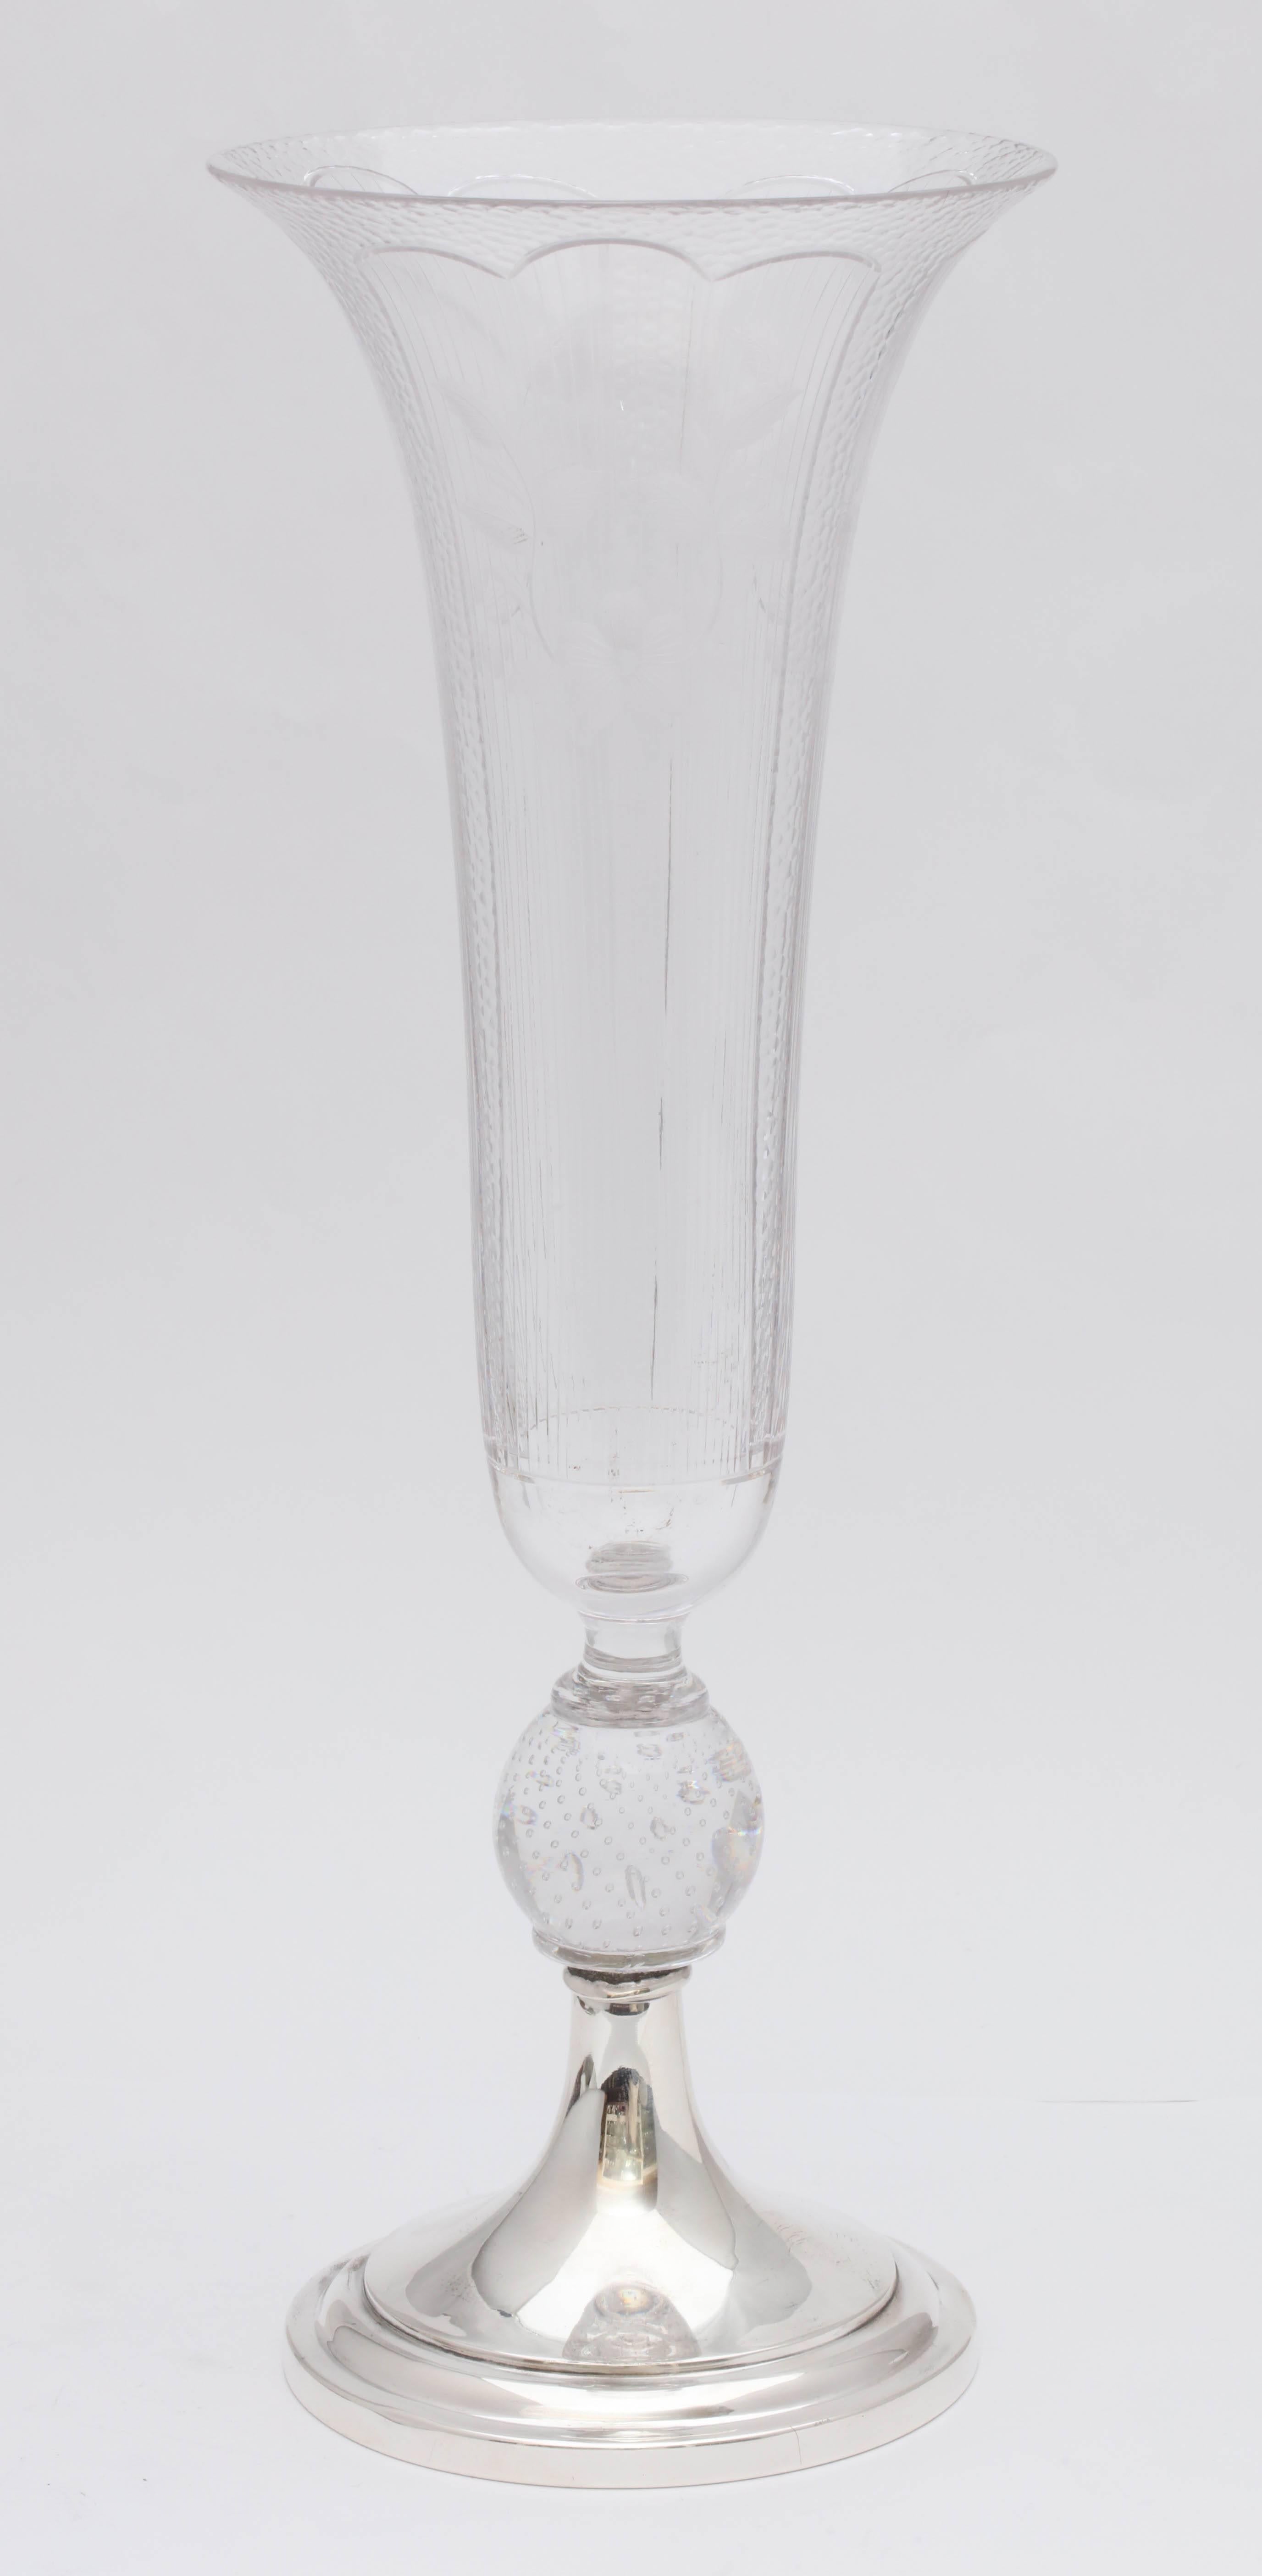 Beautiful, Edwardian, sterling silver-mounted, etched and cut crystal vase with controlled bubbles ball joining the base to the crystal vase, Wilcox and Wagoner, New Jersey, circa 1905. Measures: 13 1/2 inches tall x 4 1/2 inches diameter across